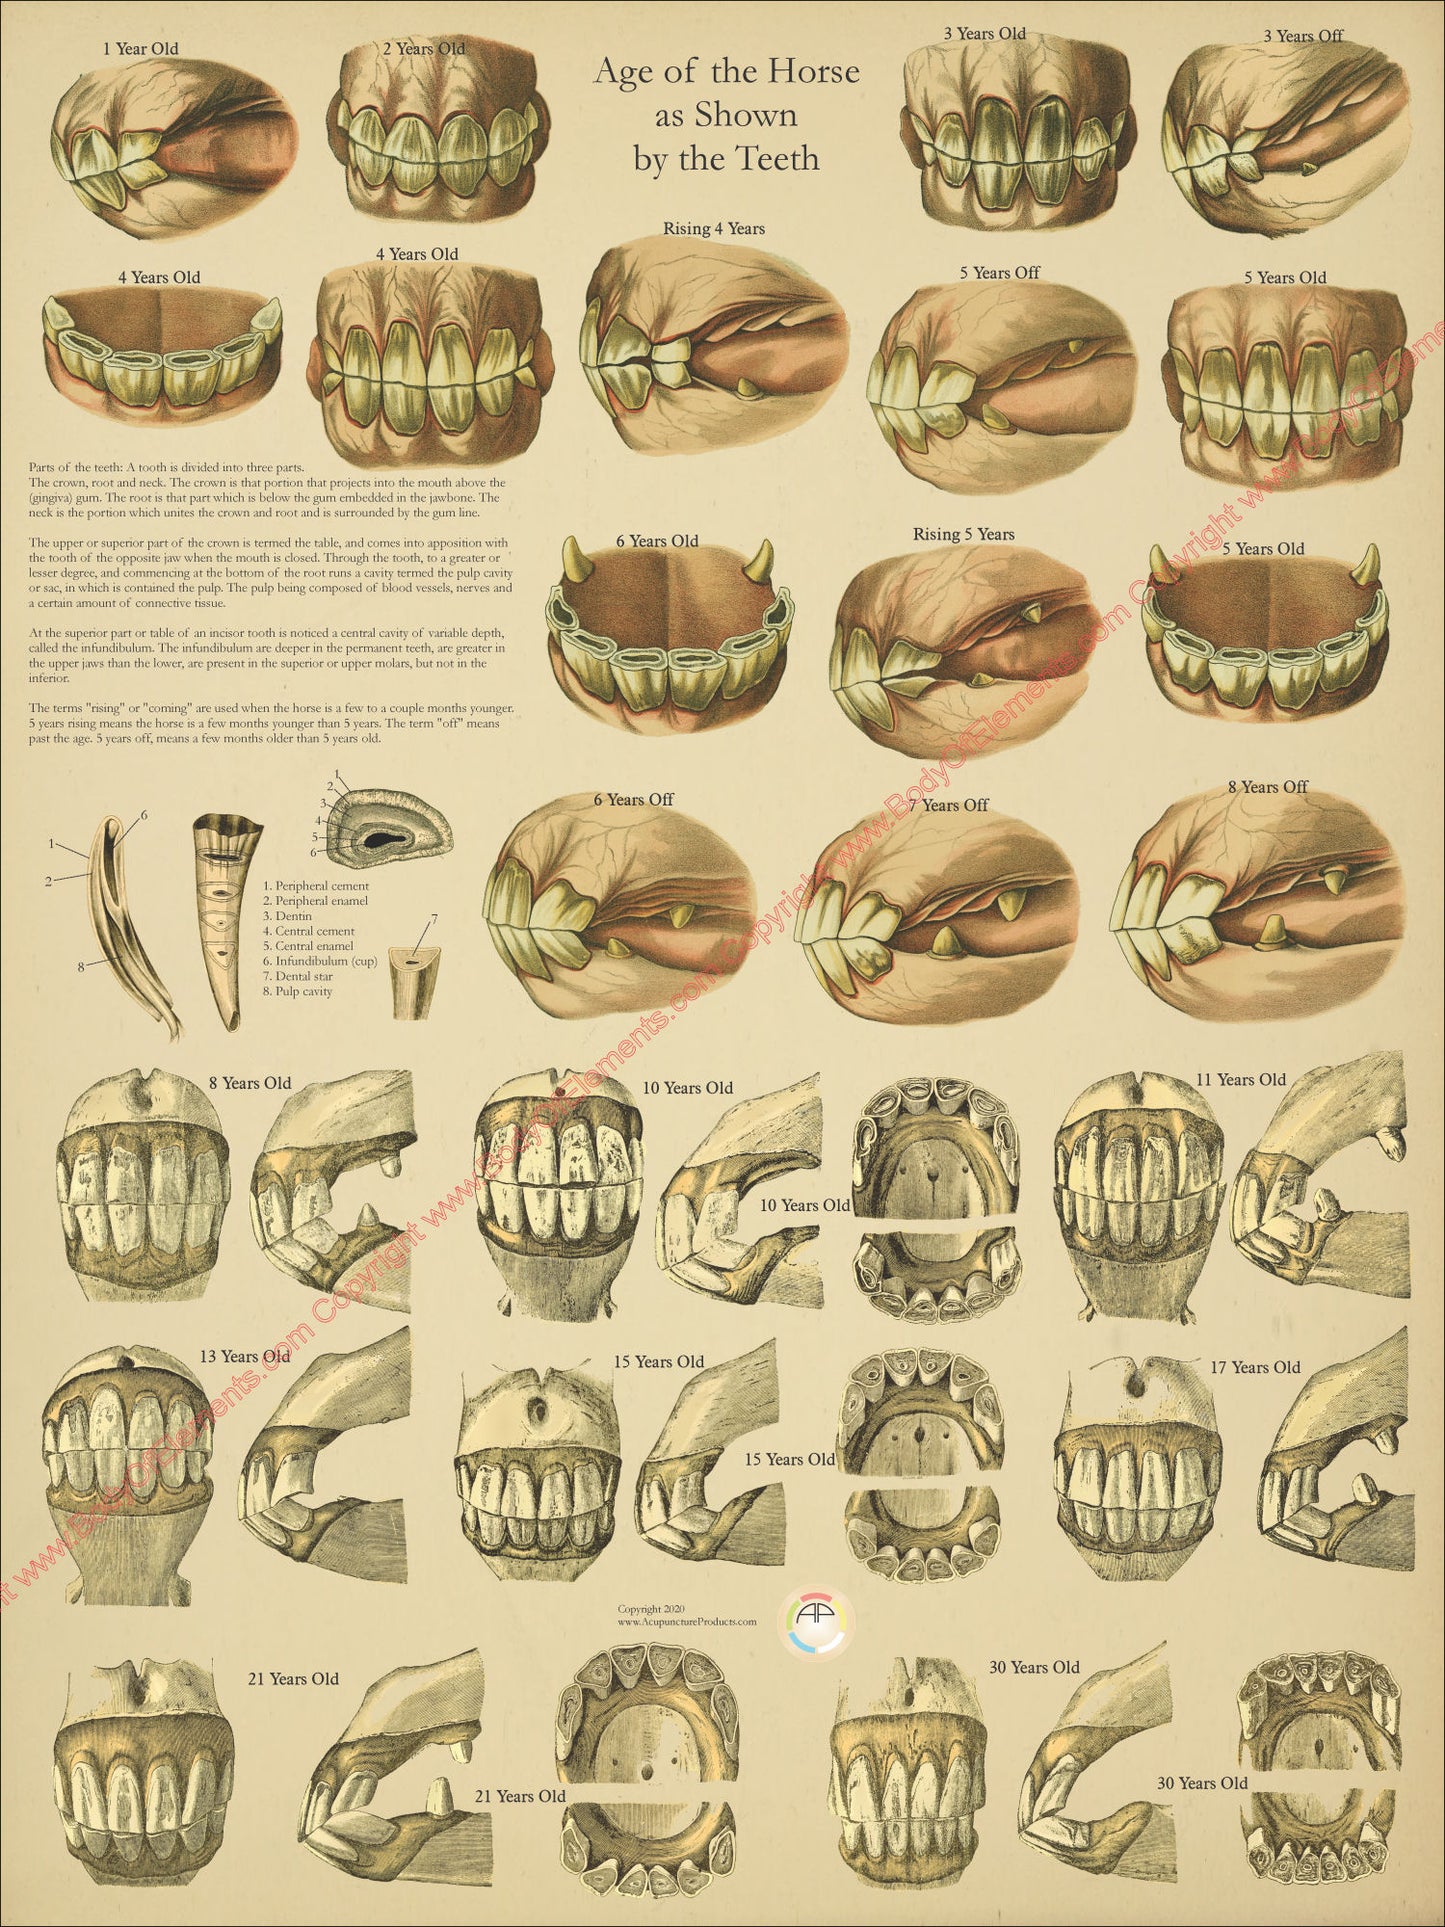 Age of the horse as shown by the teeth chart